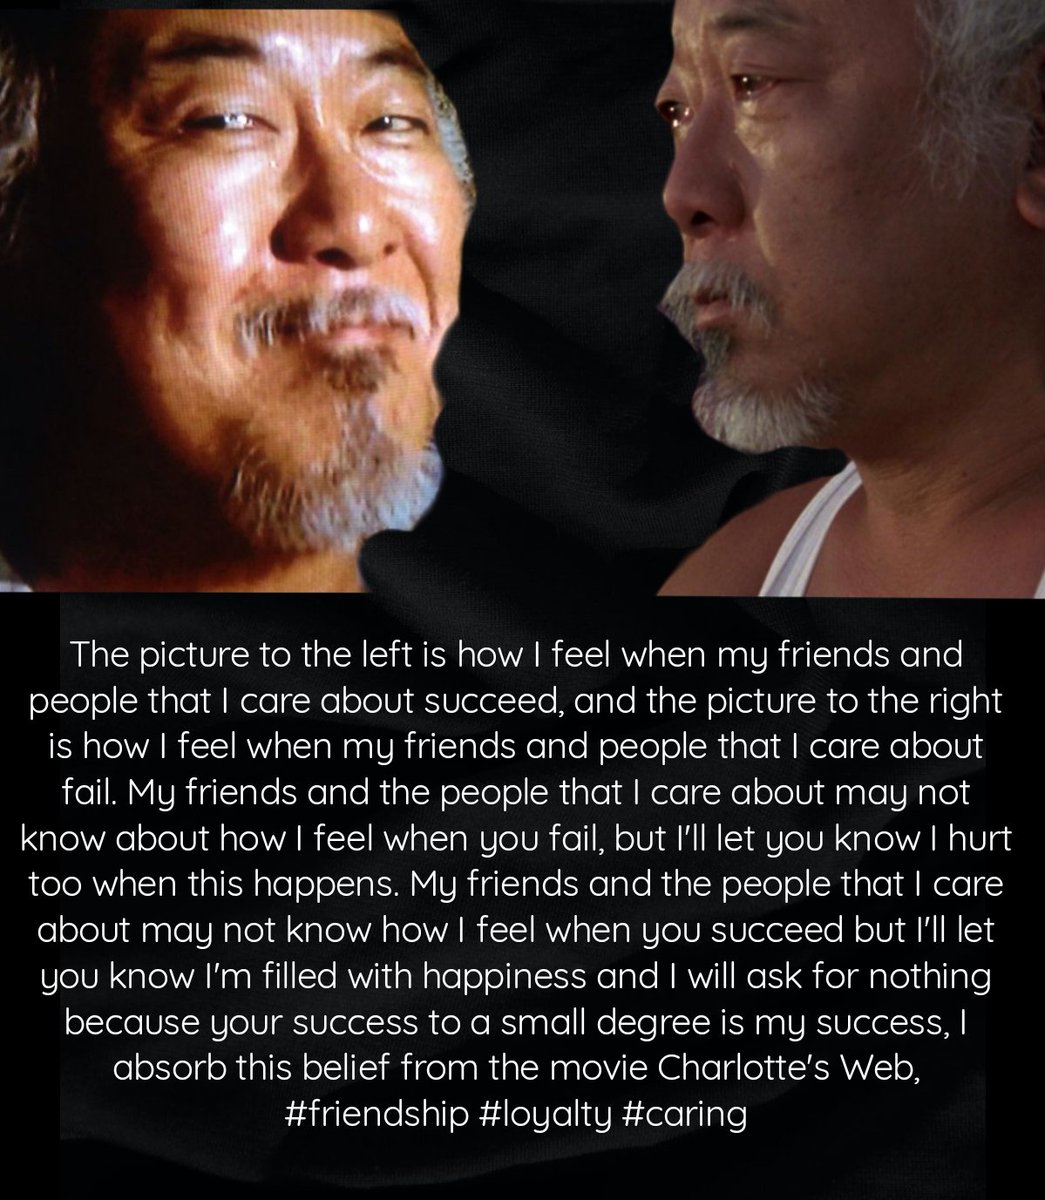 I love the friendship that I seen between Mr Miyagi Pat Morita and Daniel LaRusso @ralphmacchio in the #Thekaratekid 1984 the uplifting power of friendship and loyalty and caring. Thank you for help getting me through the 80s Mr Miyagi rest in peace ❤️✨✨😥🥹🥹